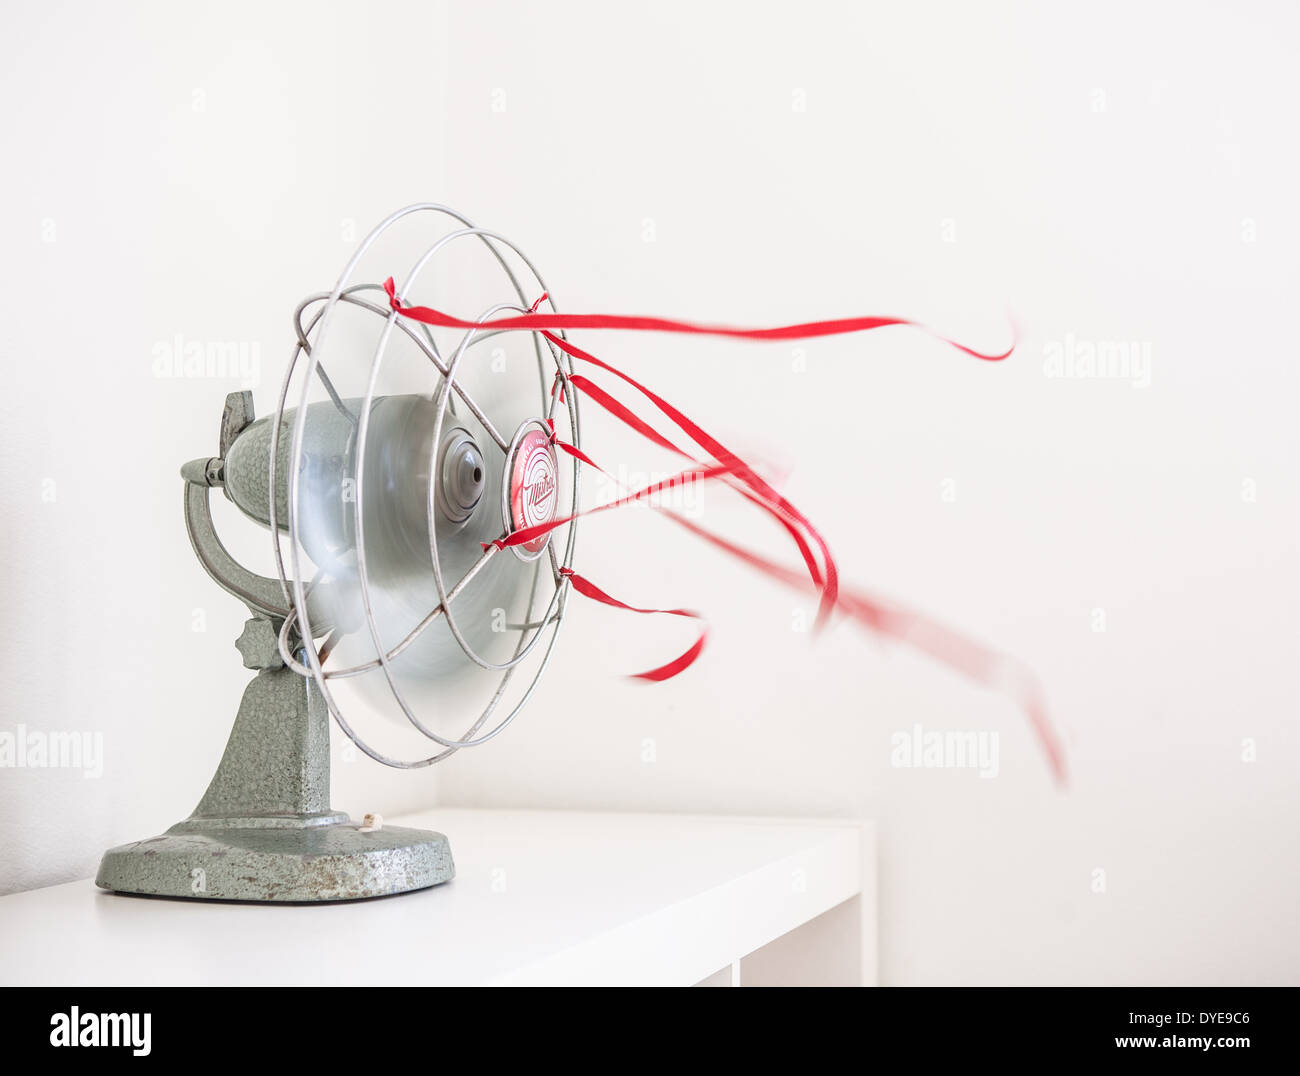 An Old Green Desk Fan With Red Ribbons Against A White Background